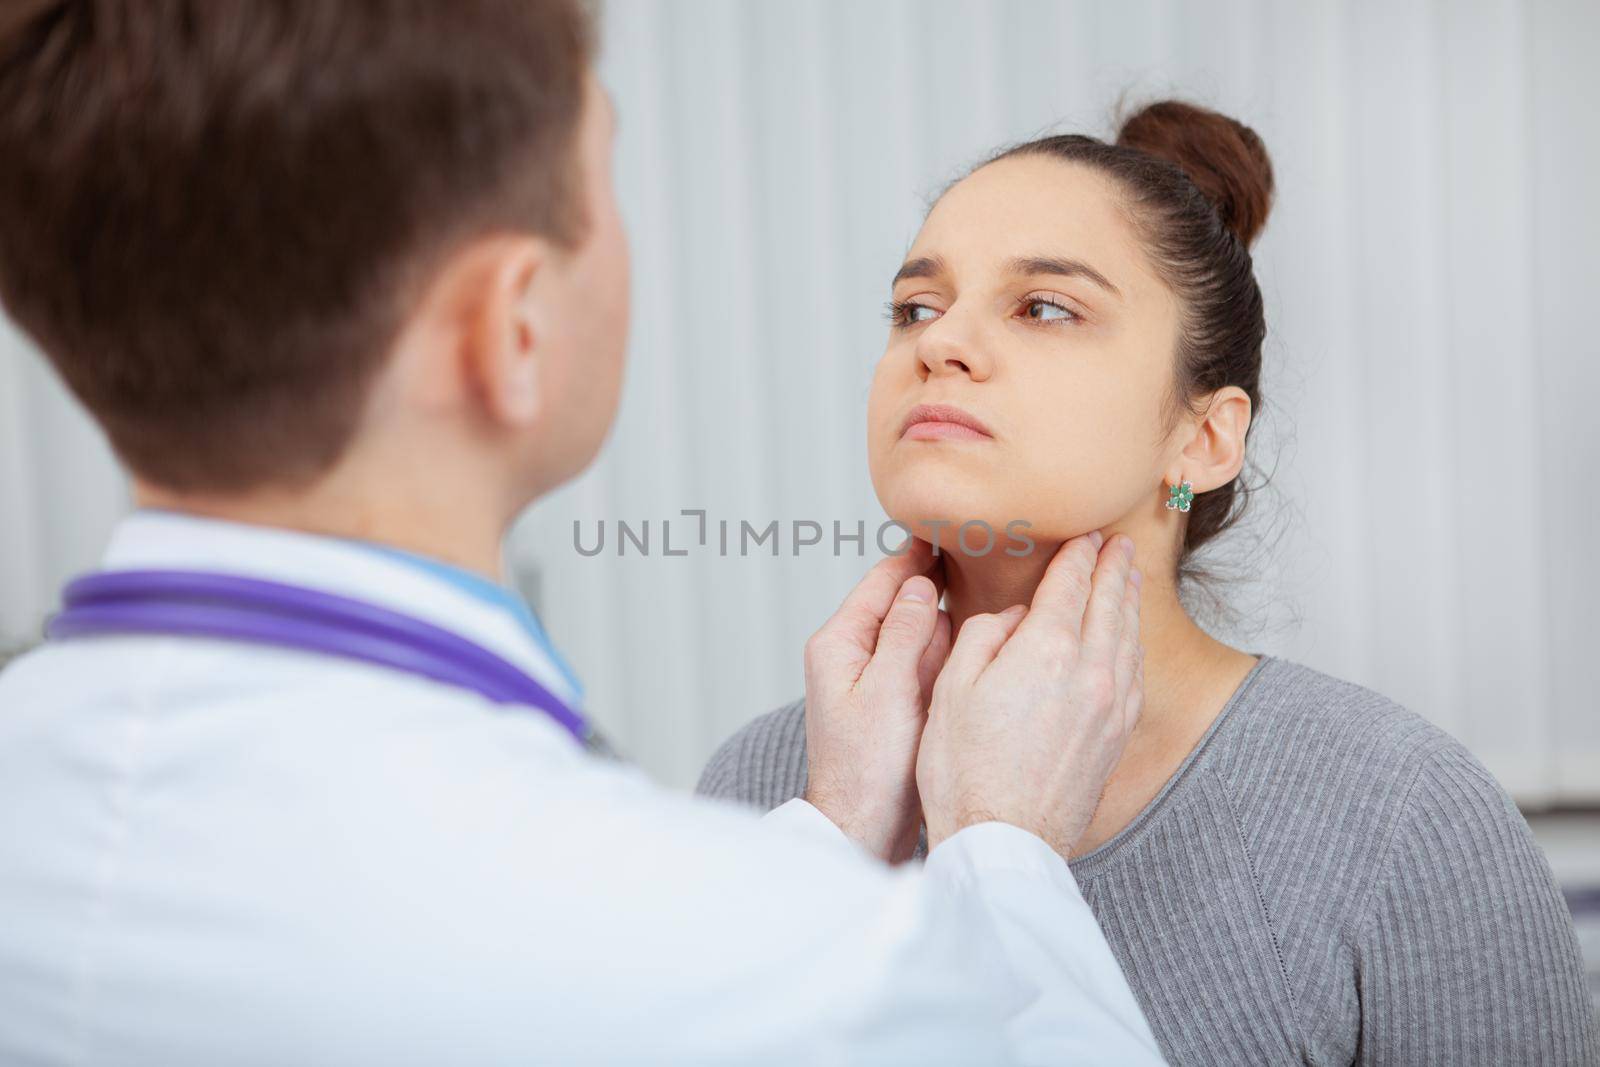 Cropped shot of a young women having her neck and throat examined by doctor at the hospital. Virus, flu, sore throat concept